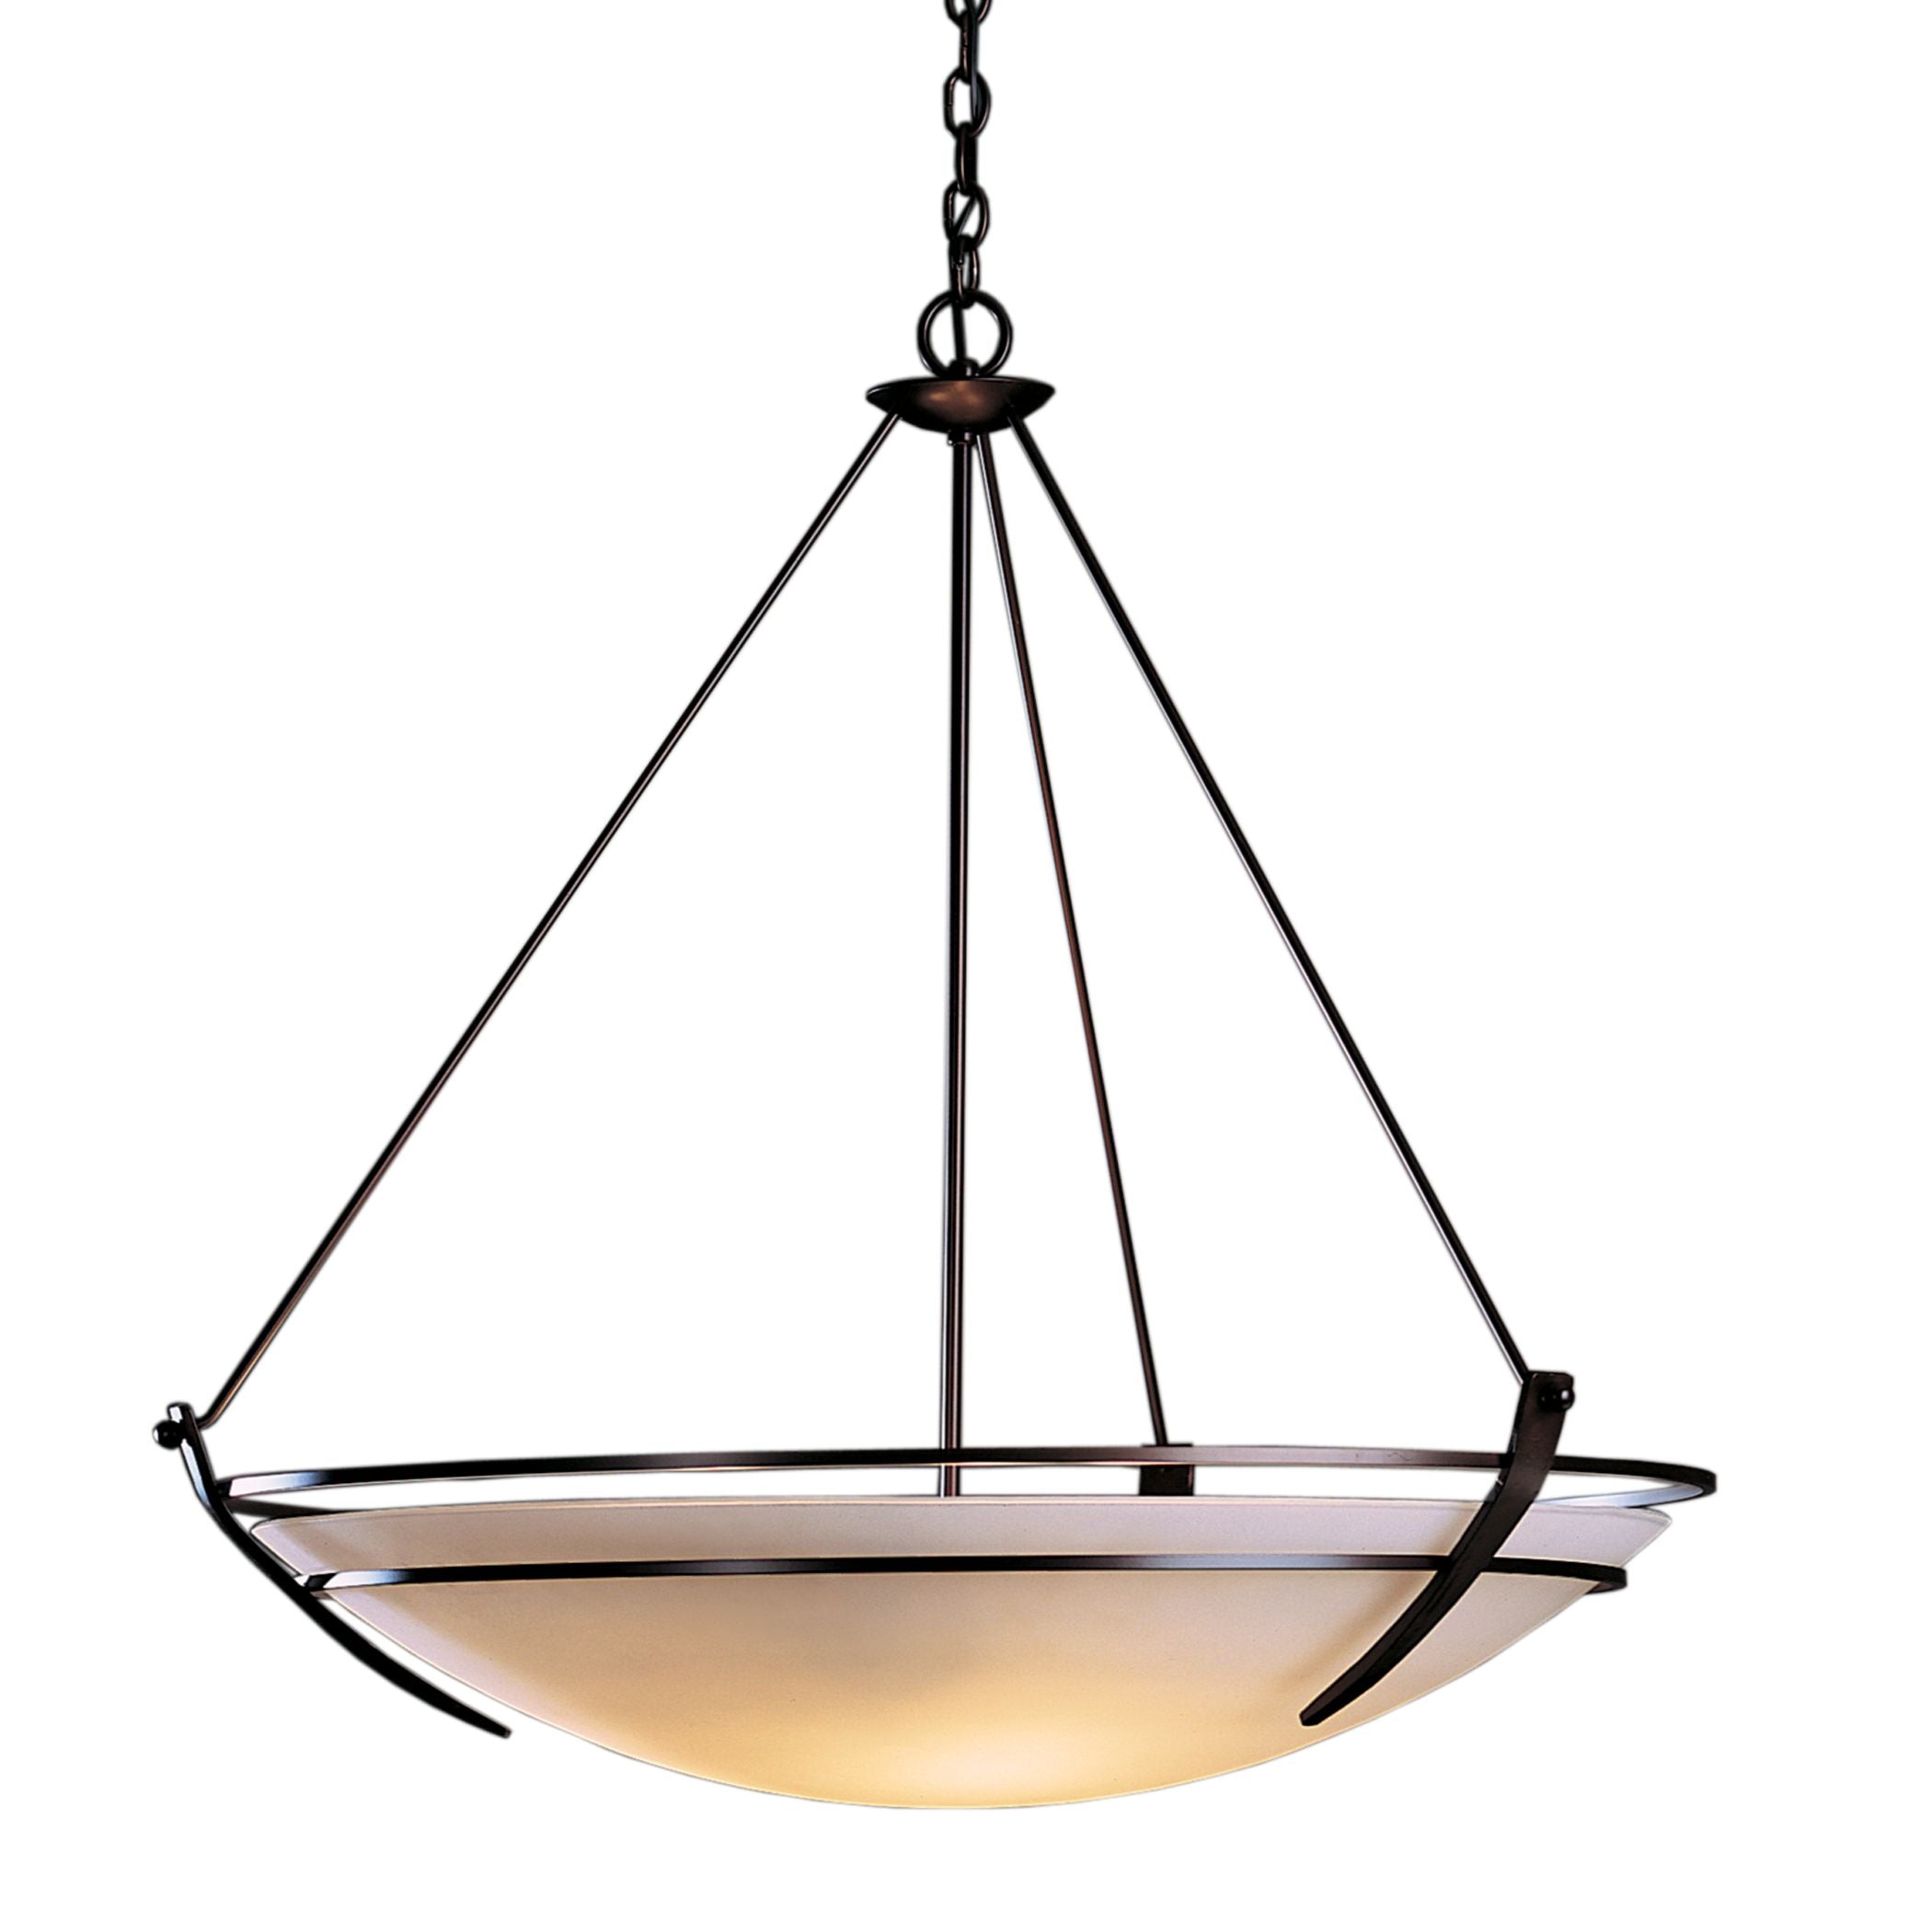 Presidio Tryne Large Scale Pendant 35" with chain